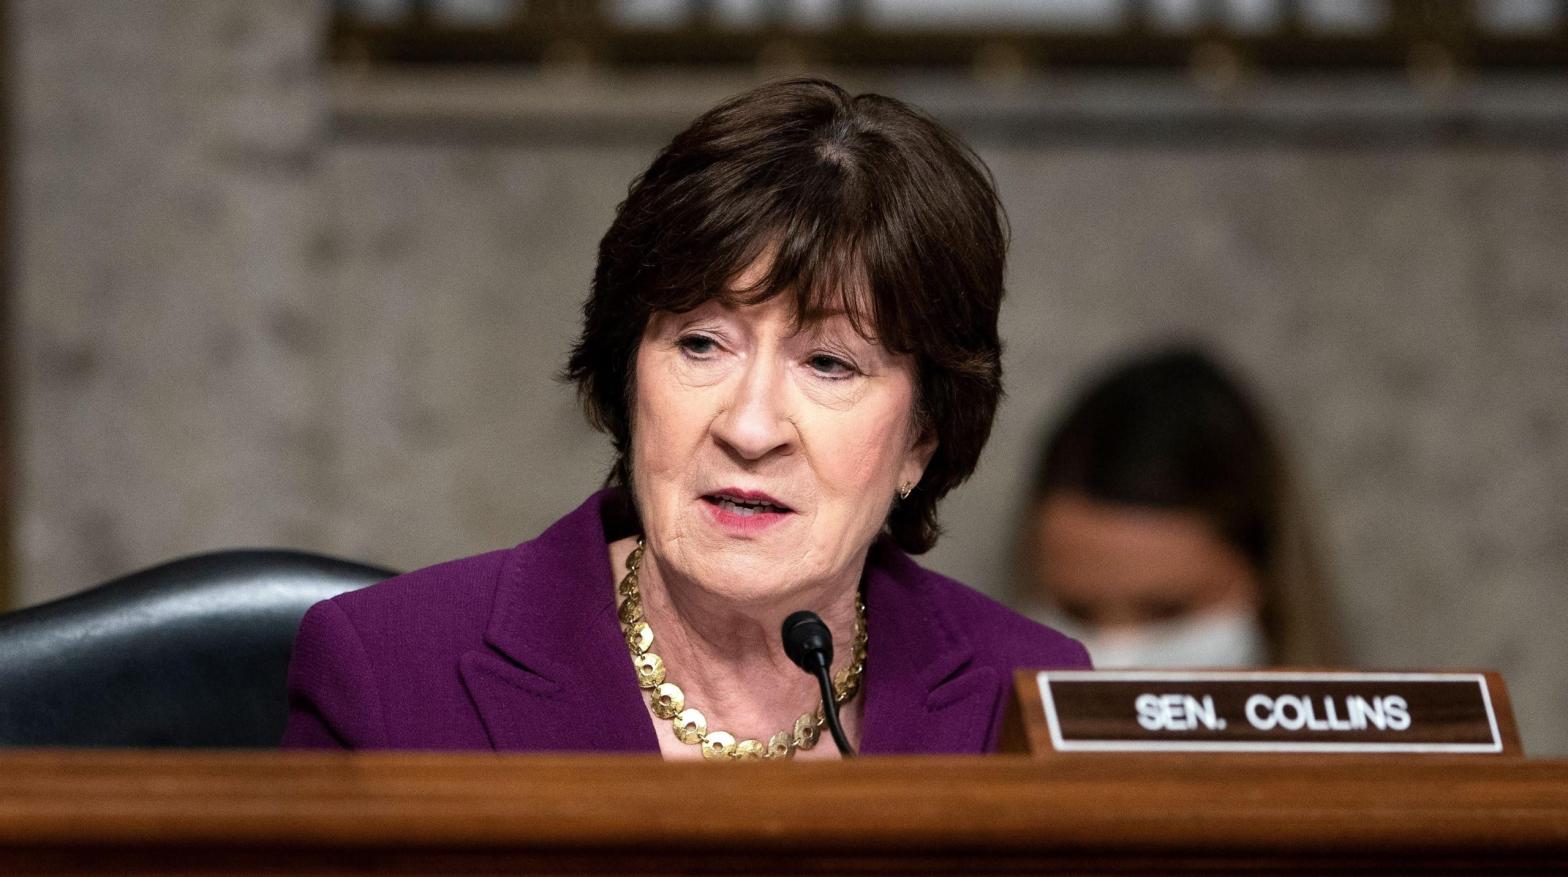 Sen. Susan Collins (R-Maine) at a Senate hearing about covid-19 on Capitol Hill in Washington, DC on January 11, 2022. (Photo: Greg Nash / AFP, Getty Images)